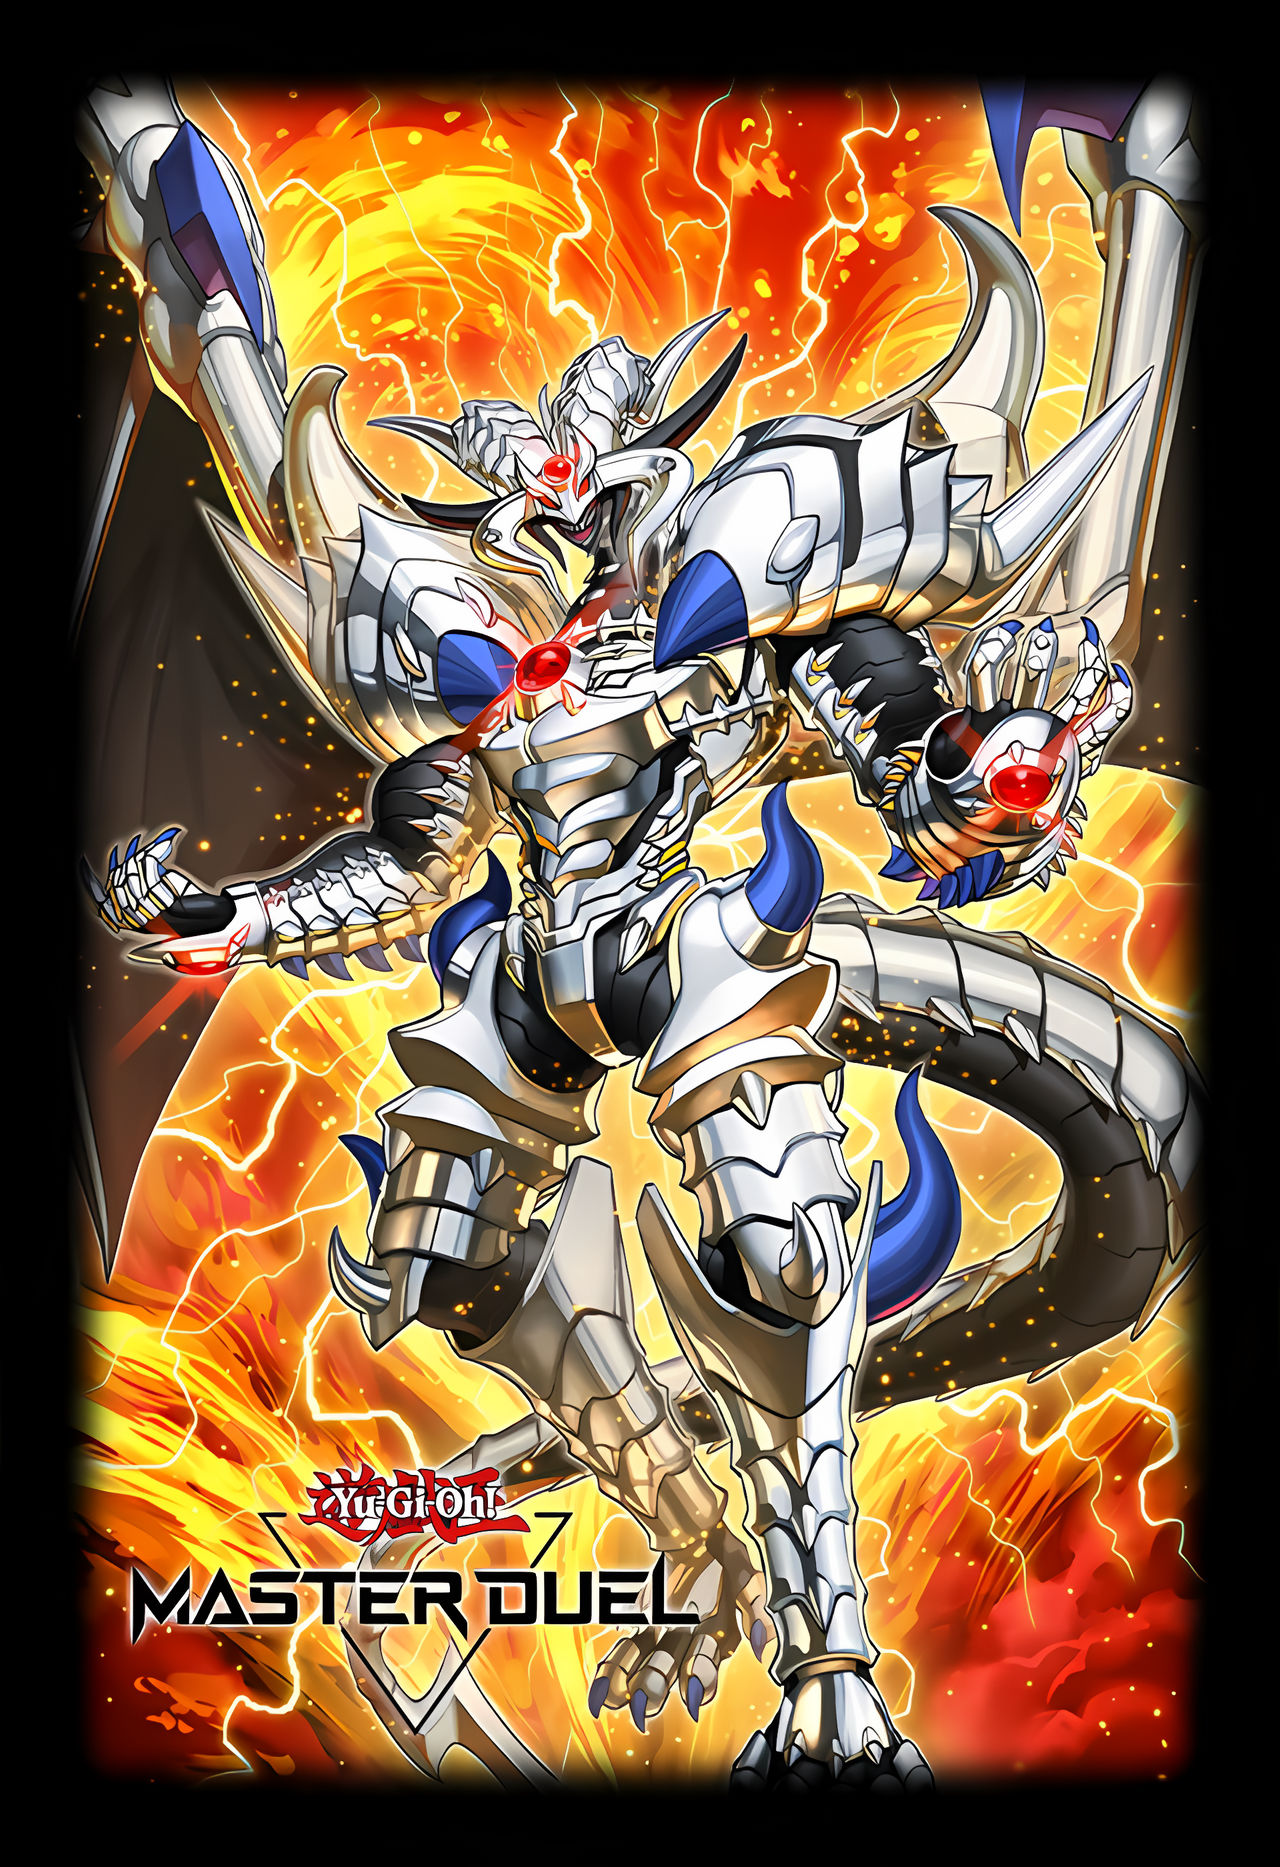 Yugioh Card Sleeves 0050 by nhociory on DeviantArt